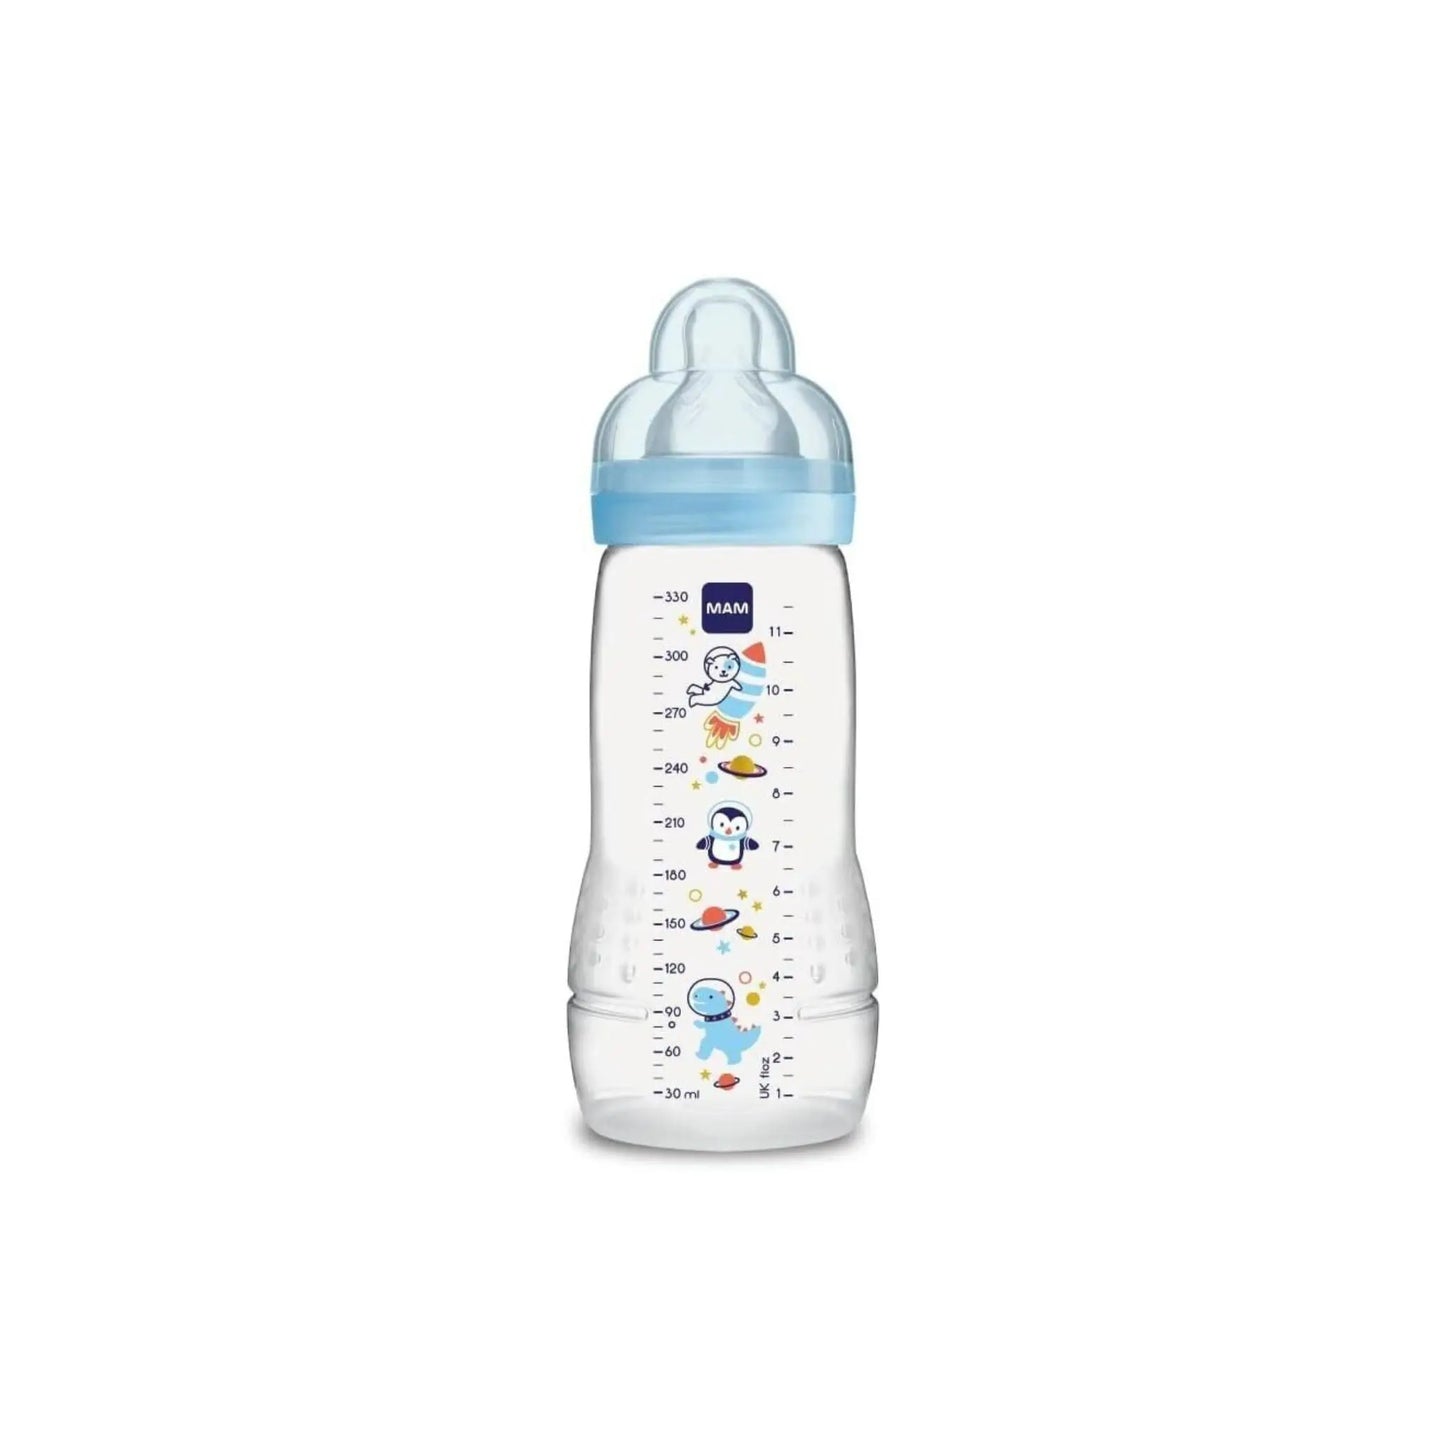 Mam Easy Active Baby Bottle with Teat Size 3 (Fast Flow), 4+ Months, 330 ml,Blue MAM